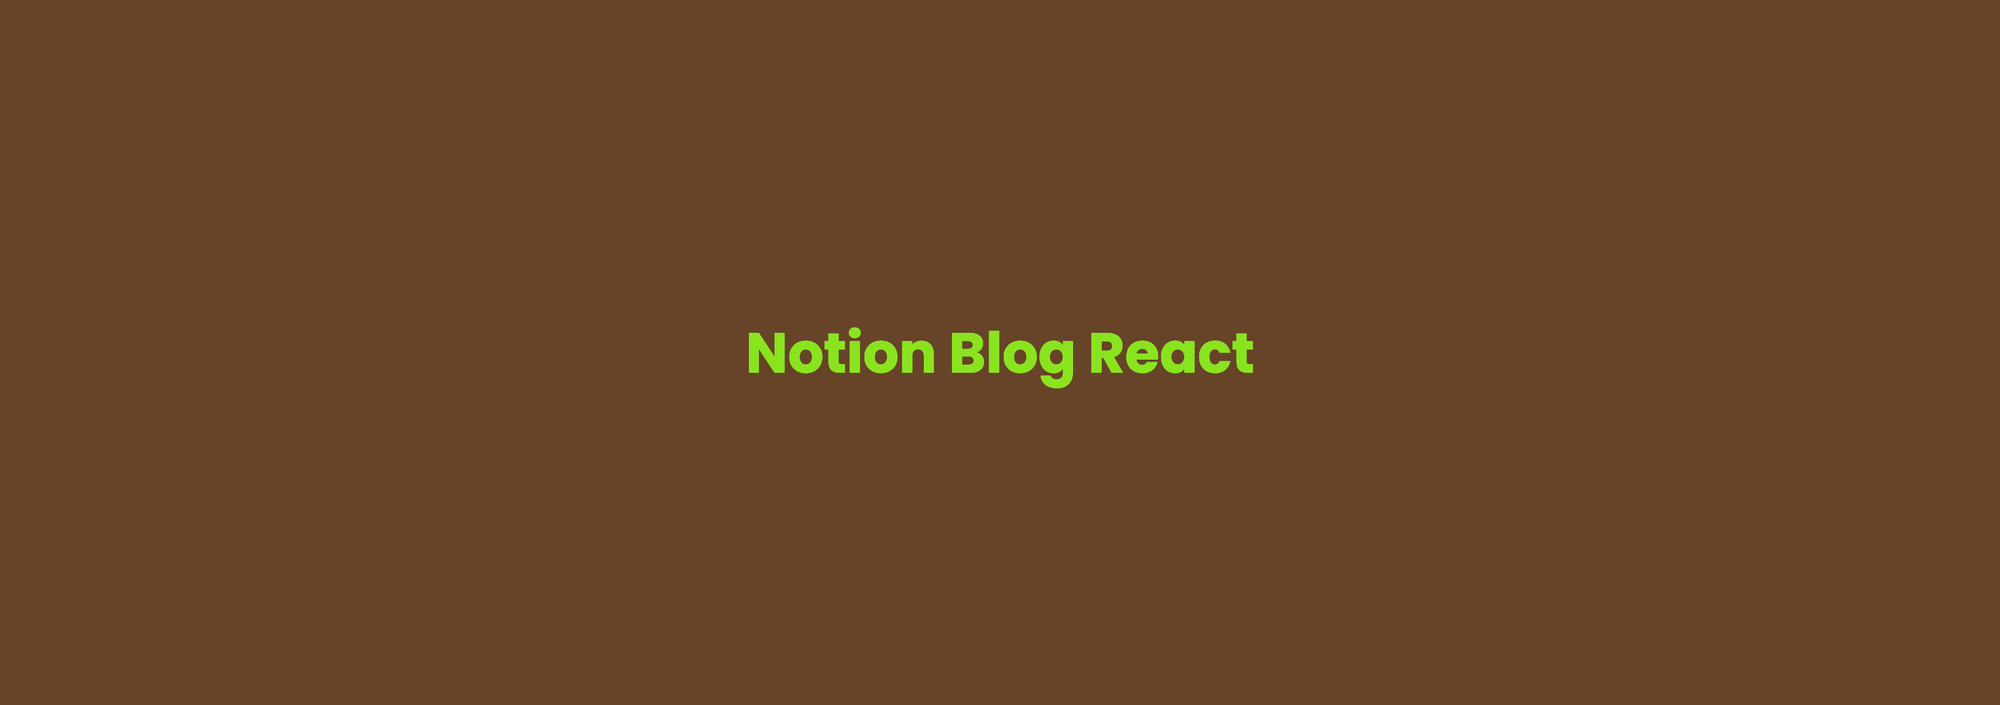 GitHub - okisdev/Notion-Blog-React: Blog powered by Notion, built with React.JS, Next.JS, tailwindcss, TypeScript, notion-api-worker and more.